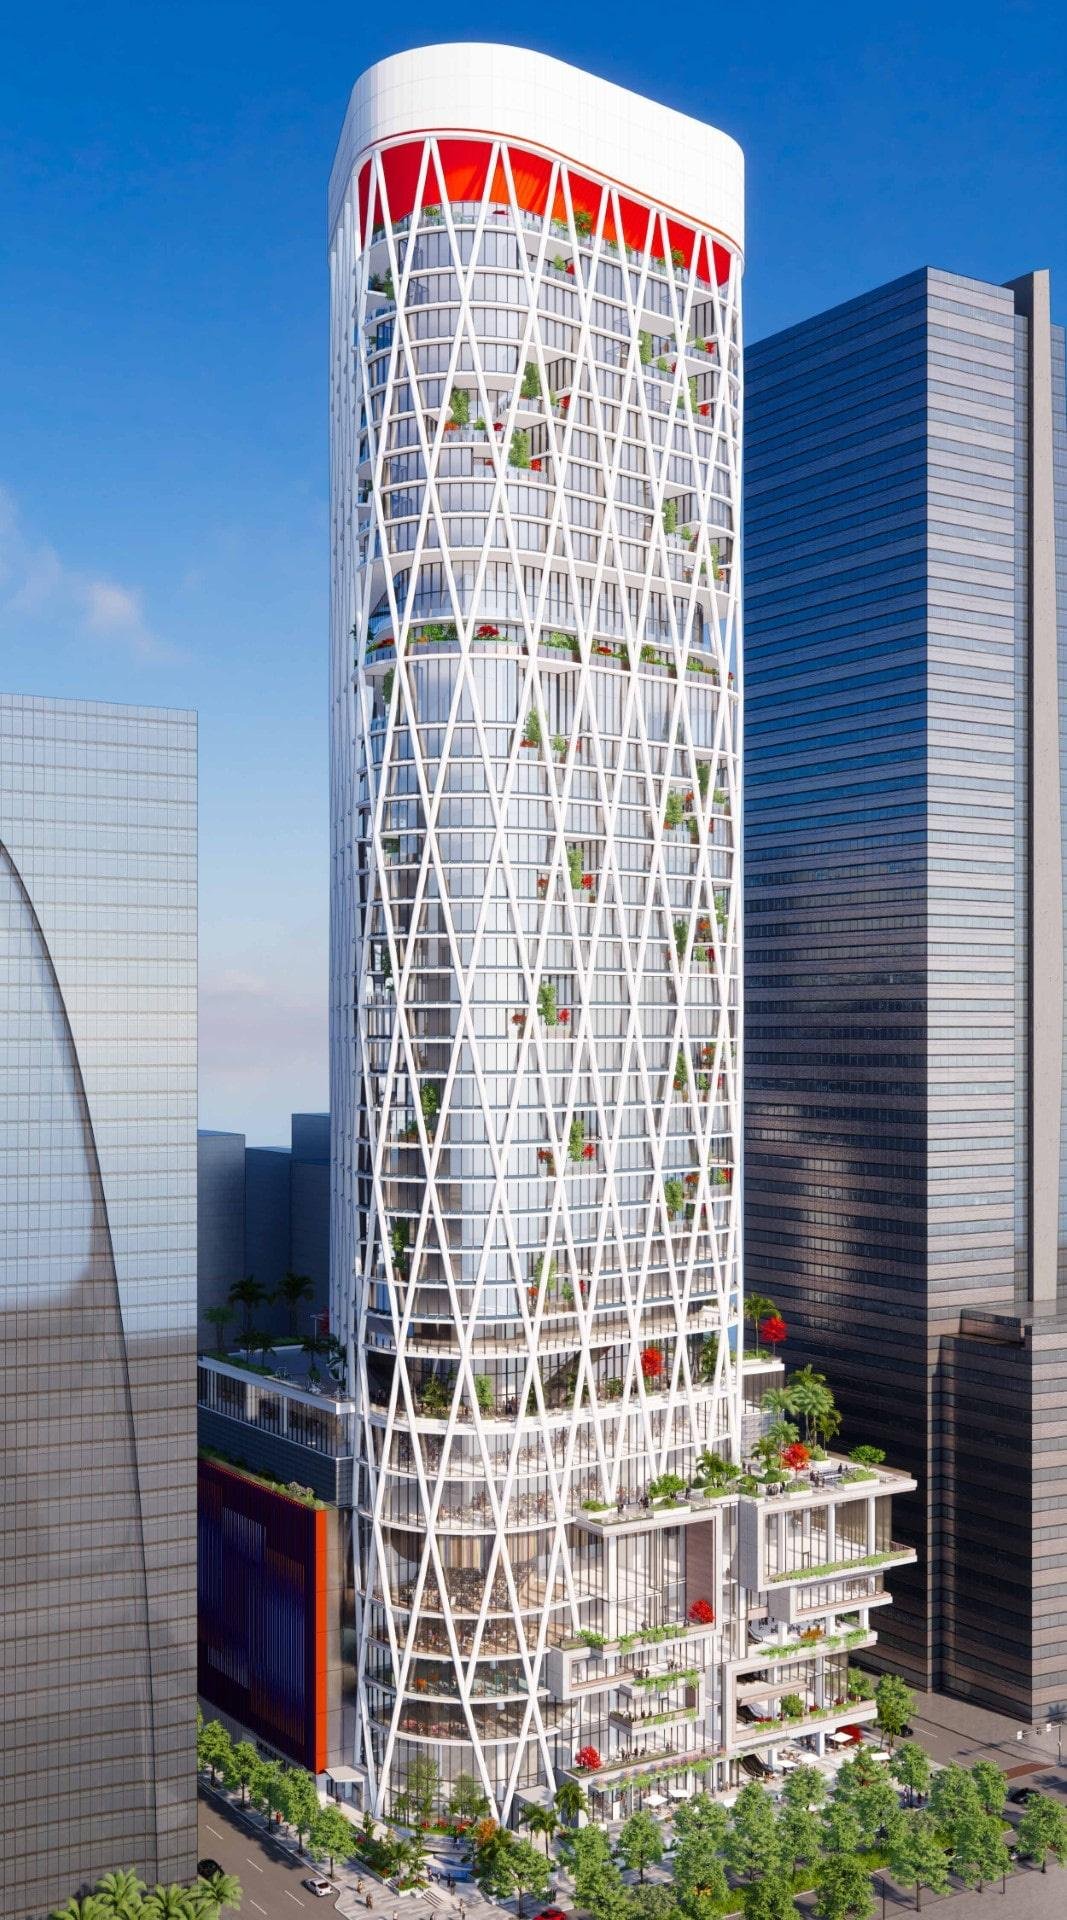 Plans Filed For Santandar Tower Set To Rise 765' On Brickell Ave 8.jpeg